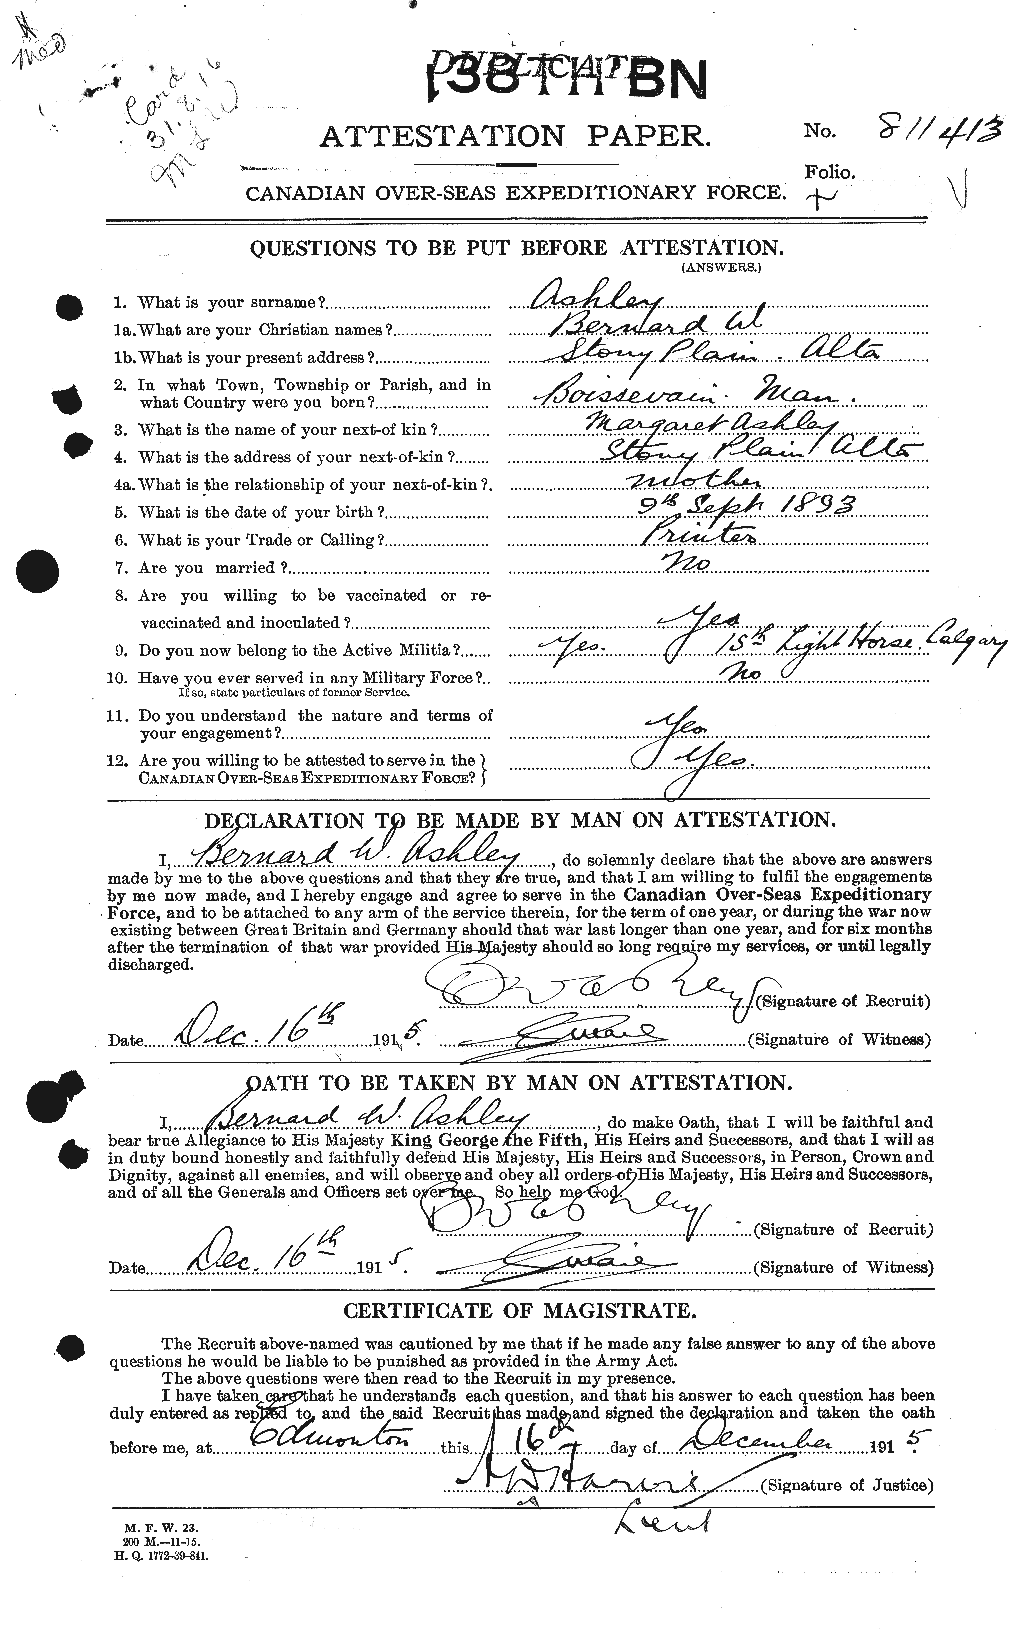 Personnel Records of the First World War - CEF 223219a